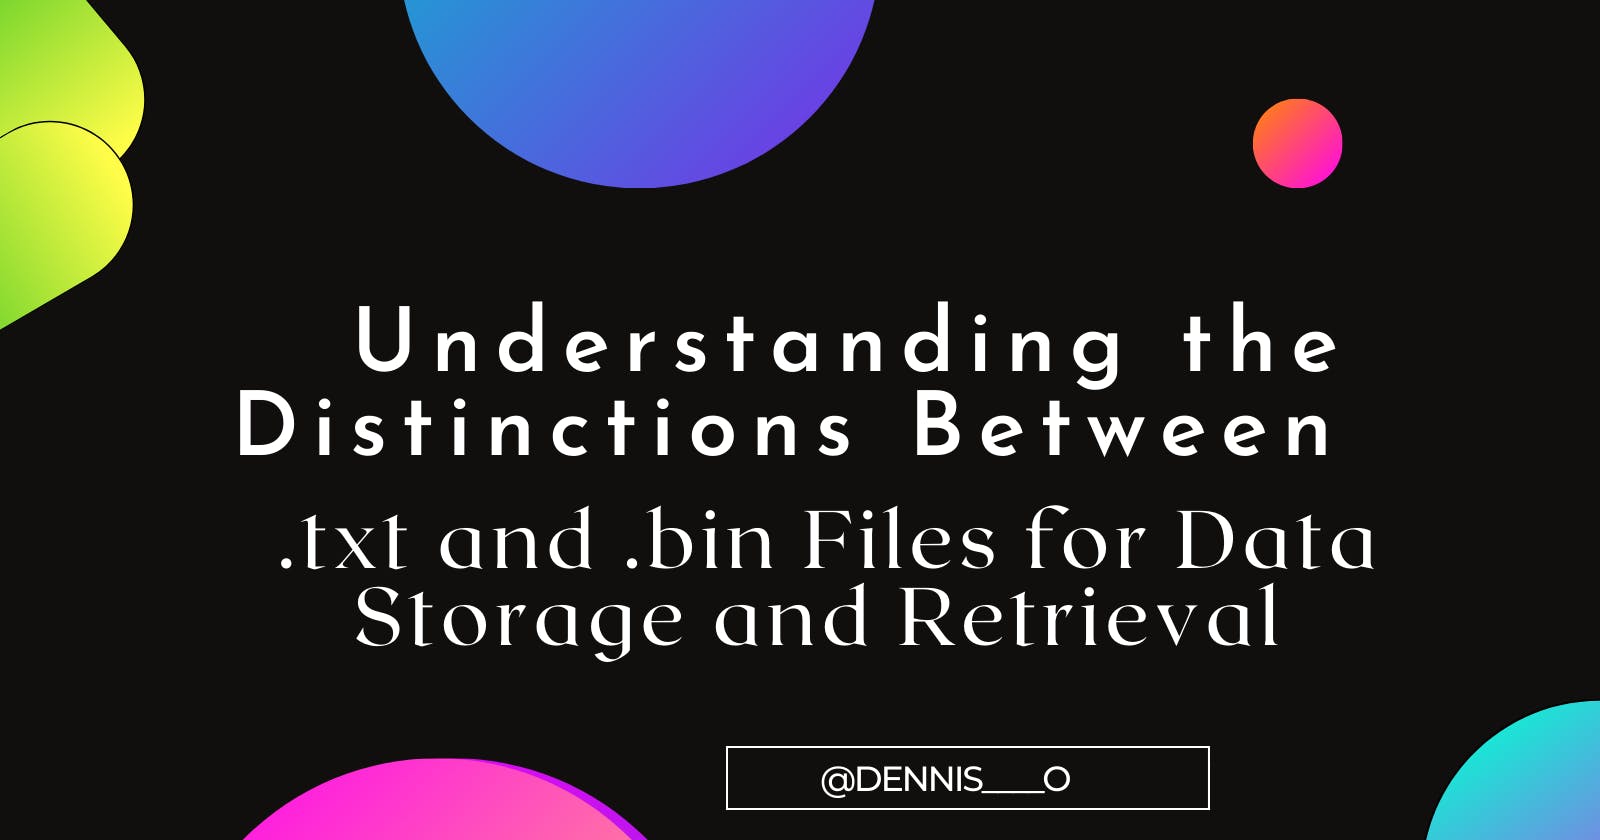 Understanding the Distinctions between .txt and .bin Files for Data Storage and Retrieval